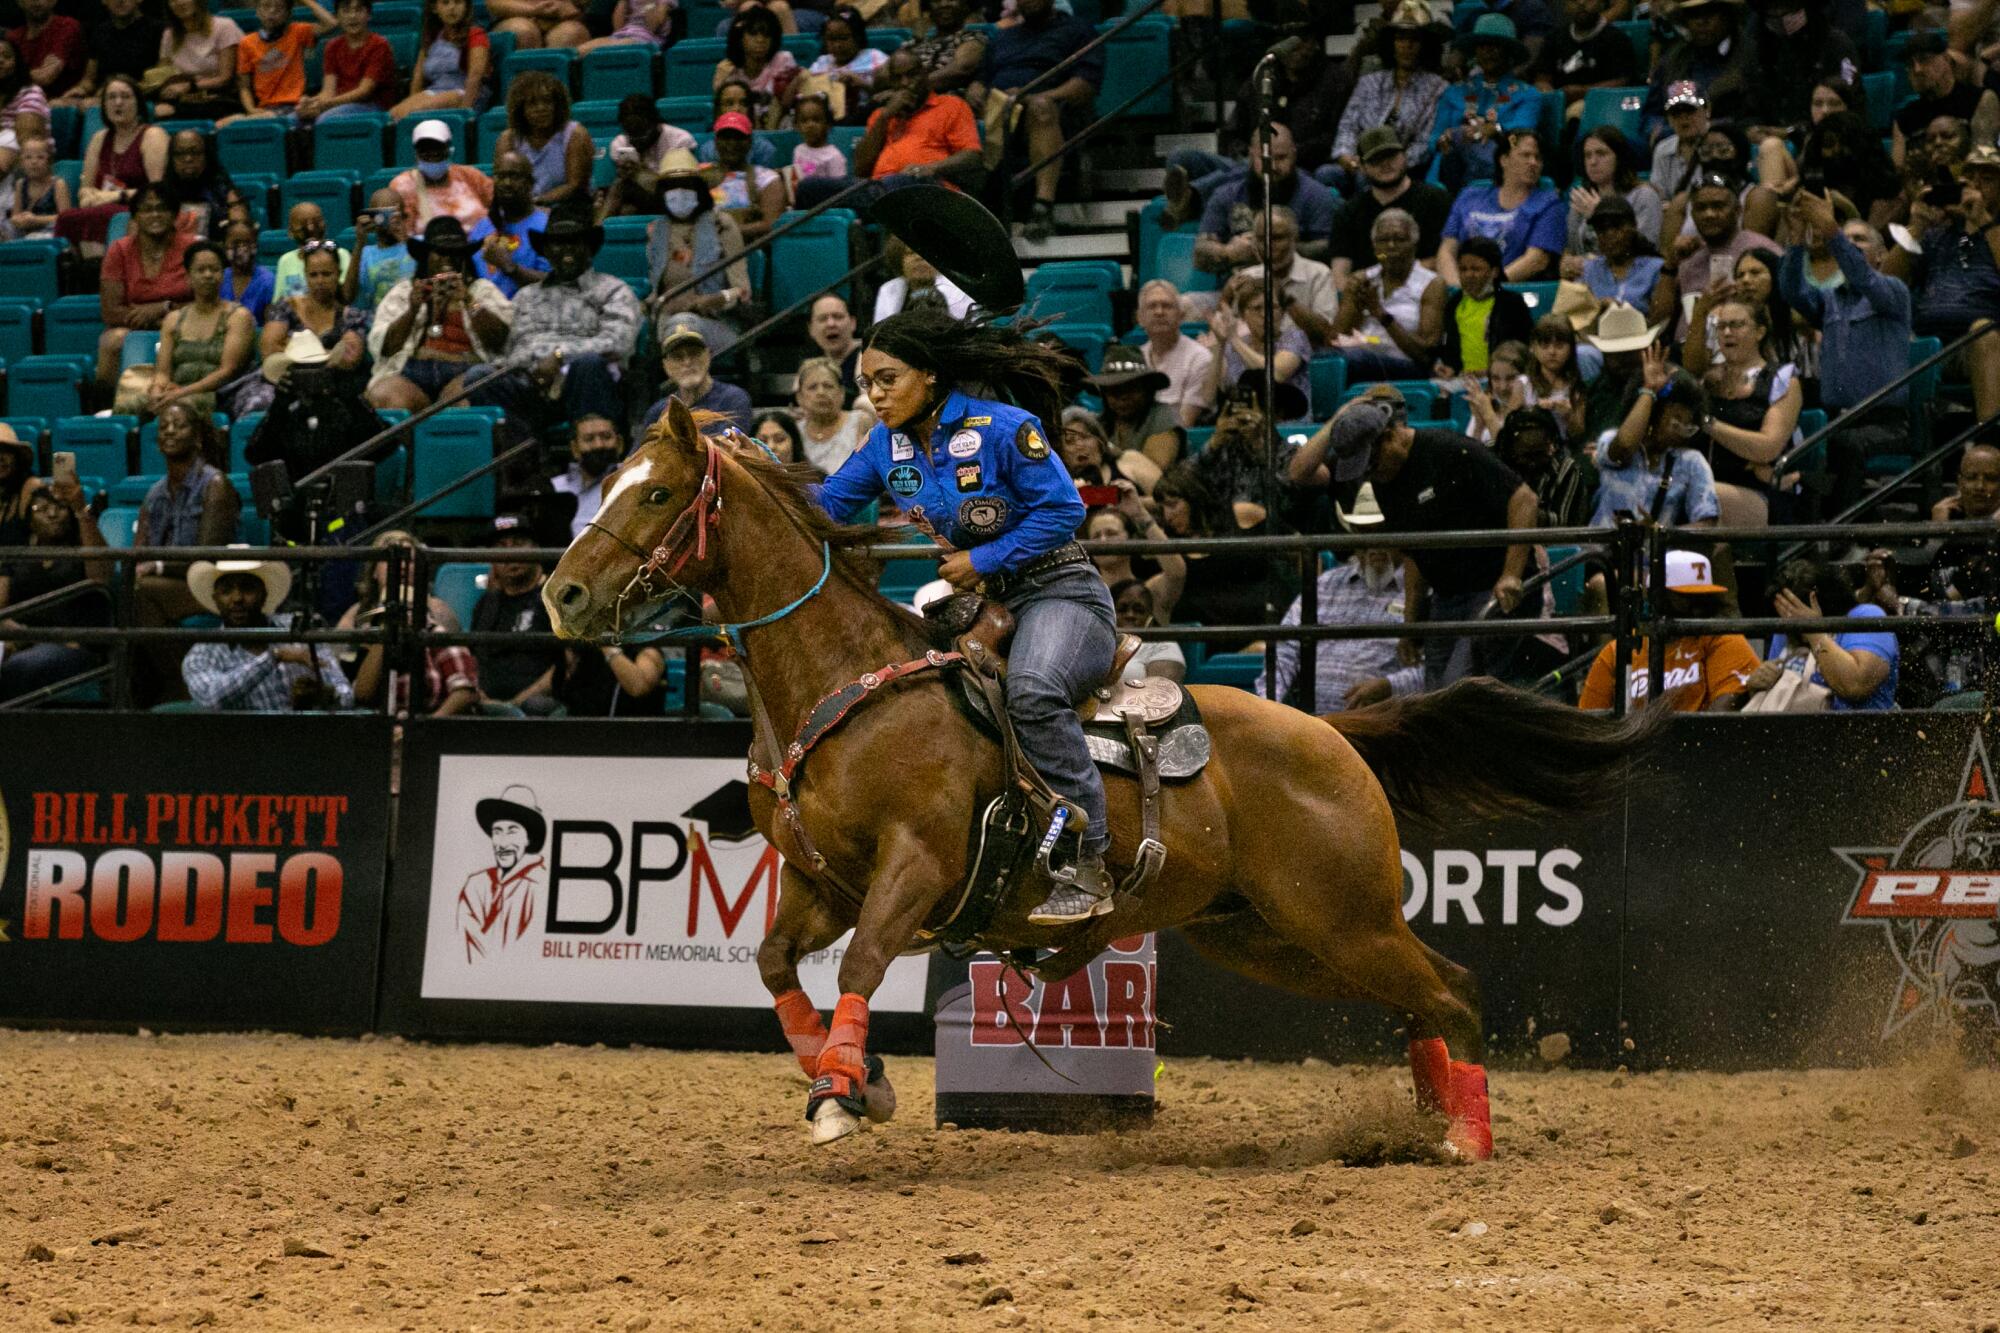 A woman and her horse race by a barrel at a rodeo as a crowd watches from the stands